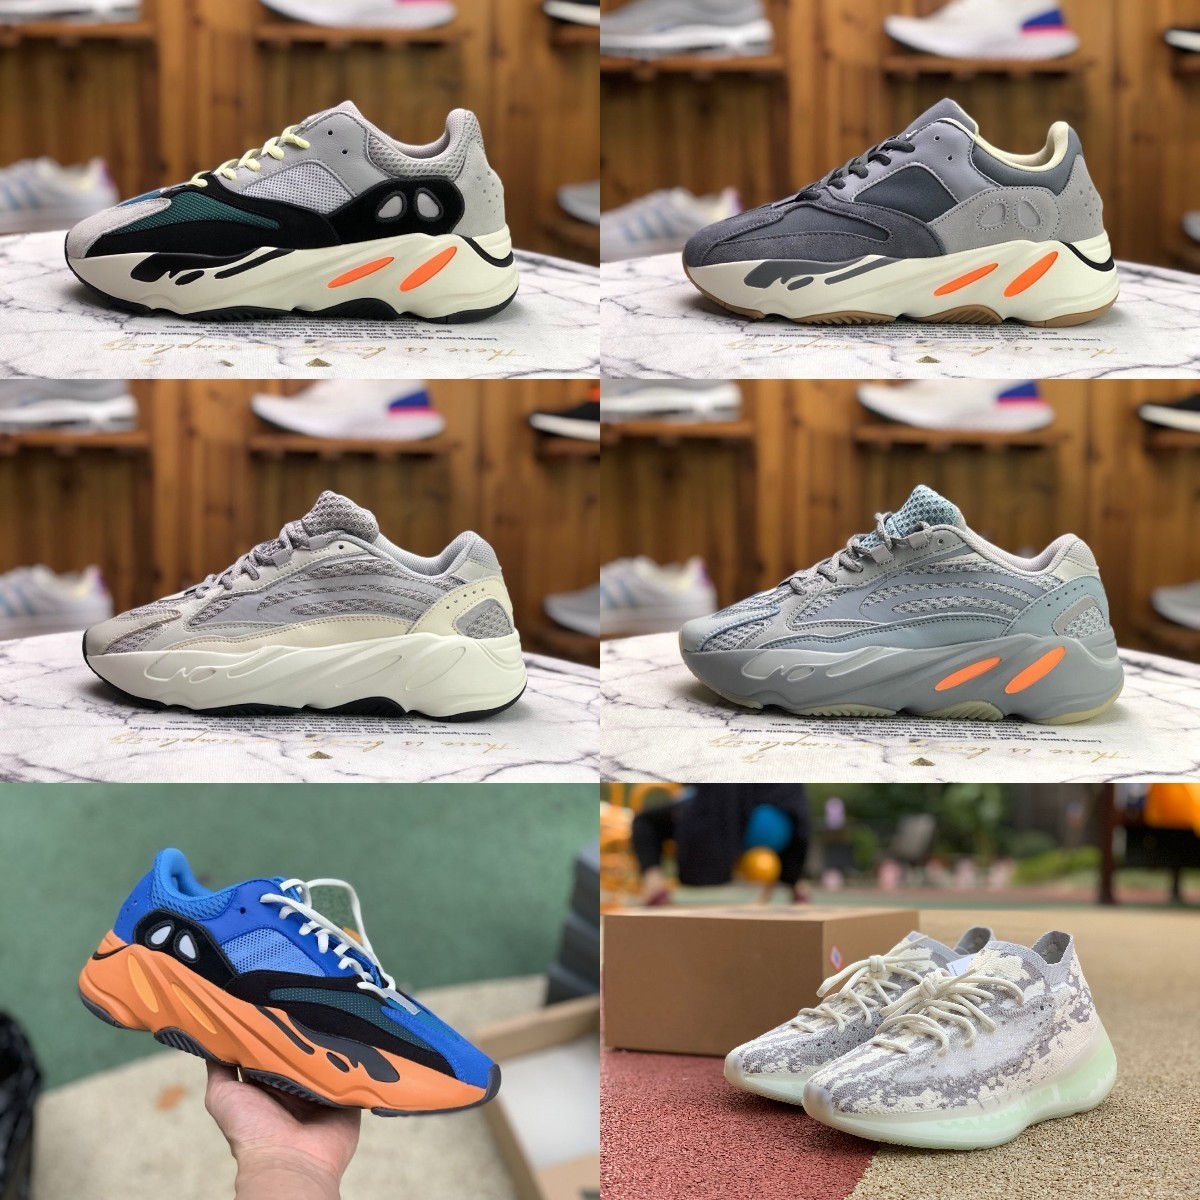 

High Quality Enflame Amber 700 V2 Men Women Sports Shoes Inertia Runner Sea Bright Blue 700S Geode Alvah Azael Static Magnet Wave Solid Grey Tephra Trainer Sneakers S8, Please contact us